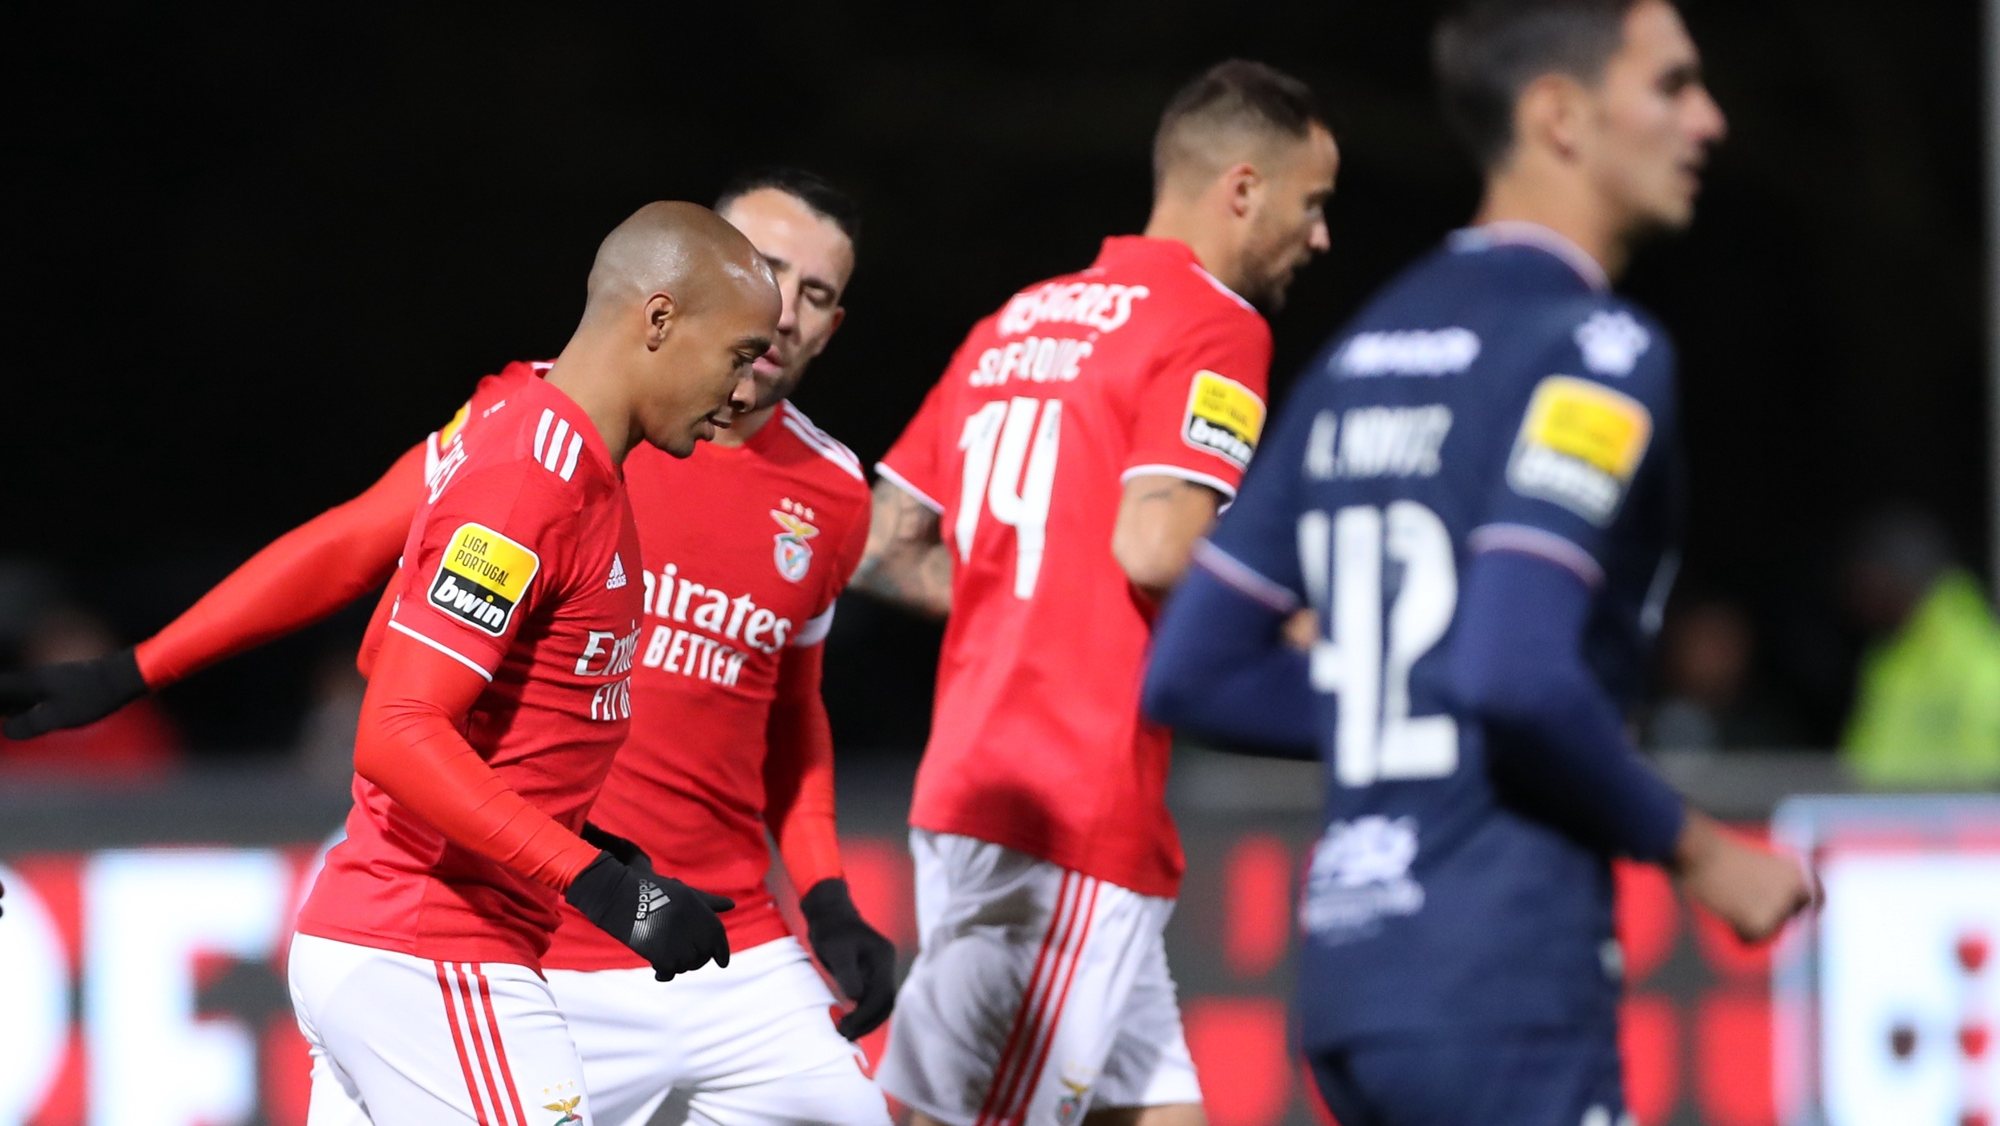 Benfica´s players celebrate a goal during their Portuguese first league soccer match between Belenenses SAD vs Benfica, at National Stadium, in Oeiras, near of Lisbon, Portugal, 27 November 2021. Belenenses SAD will host Benfica today with only nine players on the field, due to the outbreak of covid-19 that ravaged the squad, for the 12th round match of the Portuguese Football League. ANTONIO COTRIM/LUSA